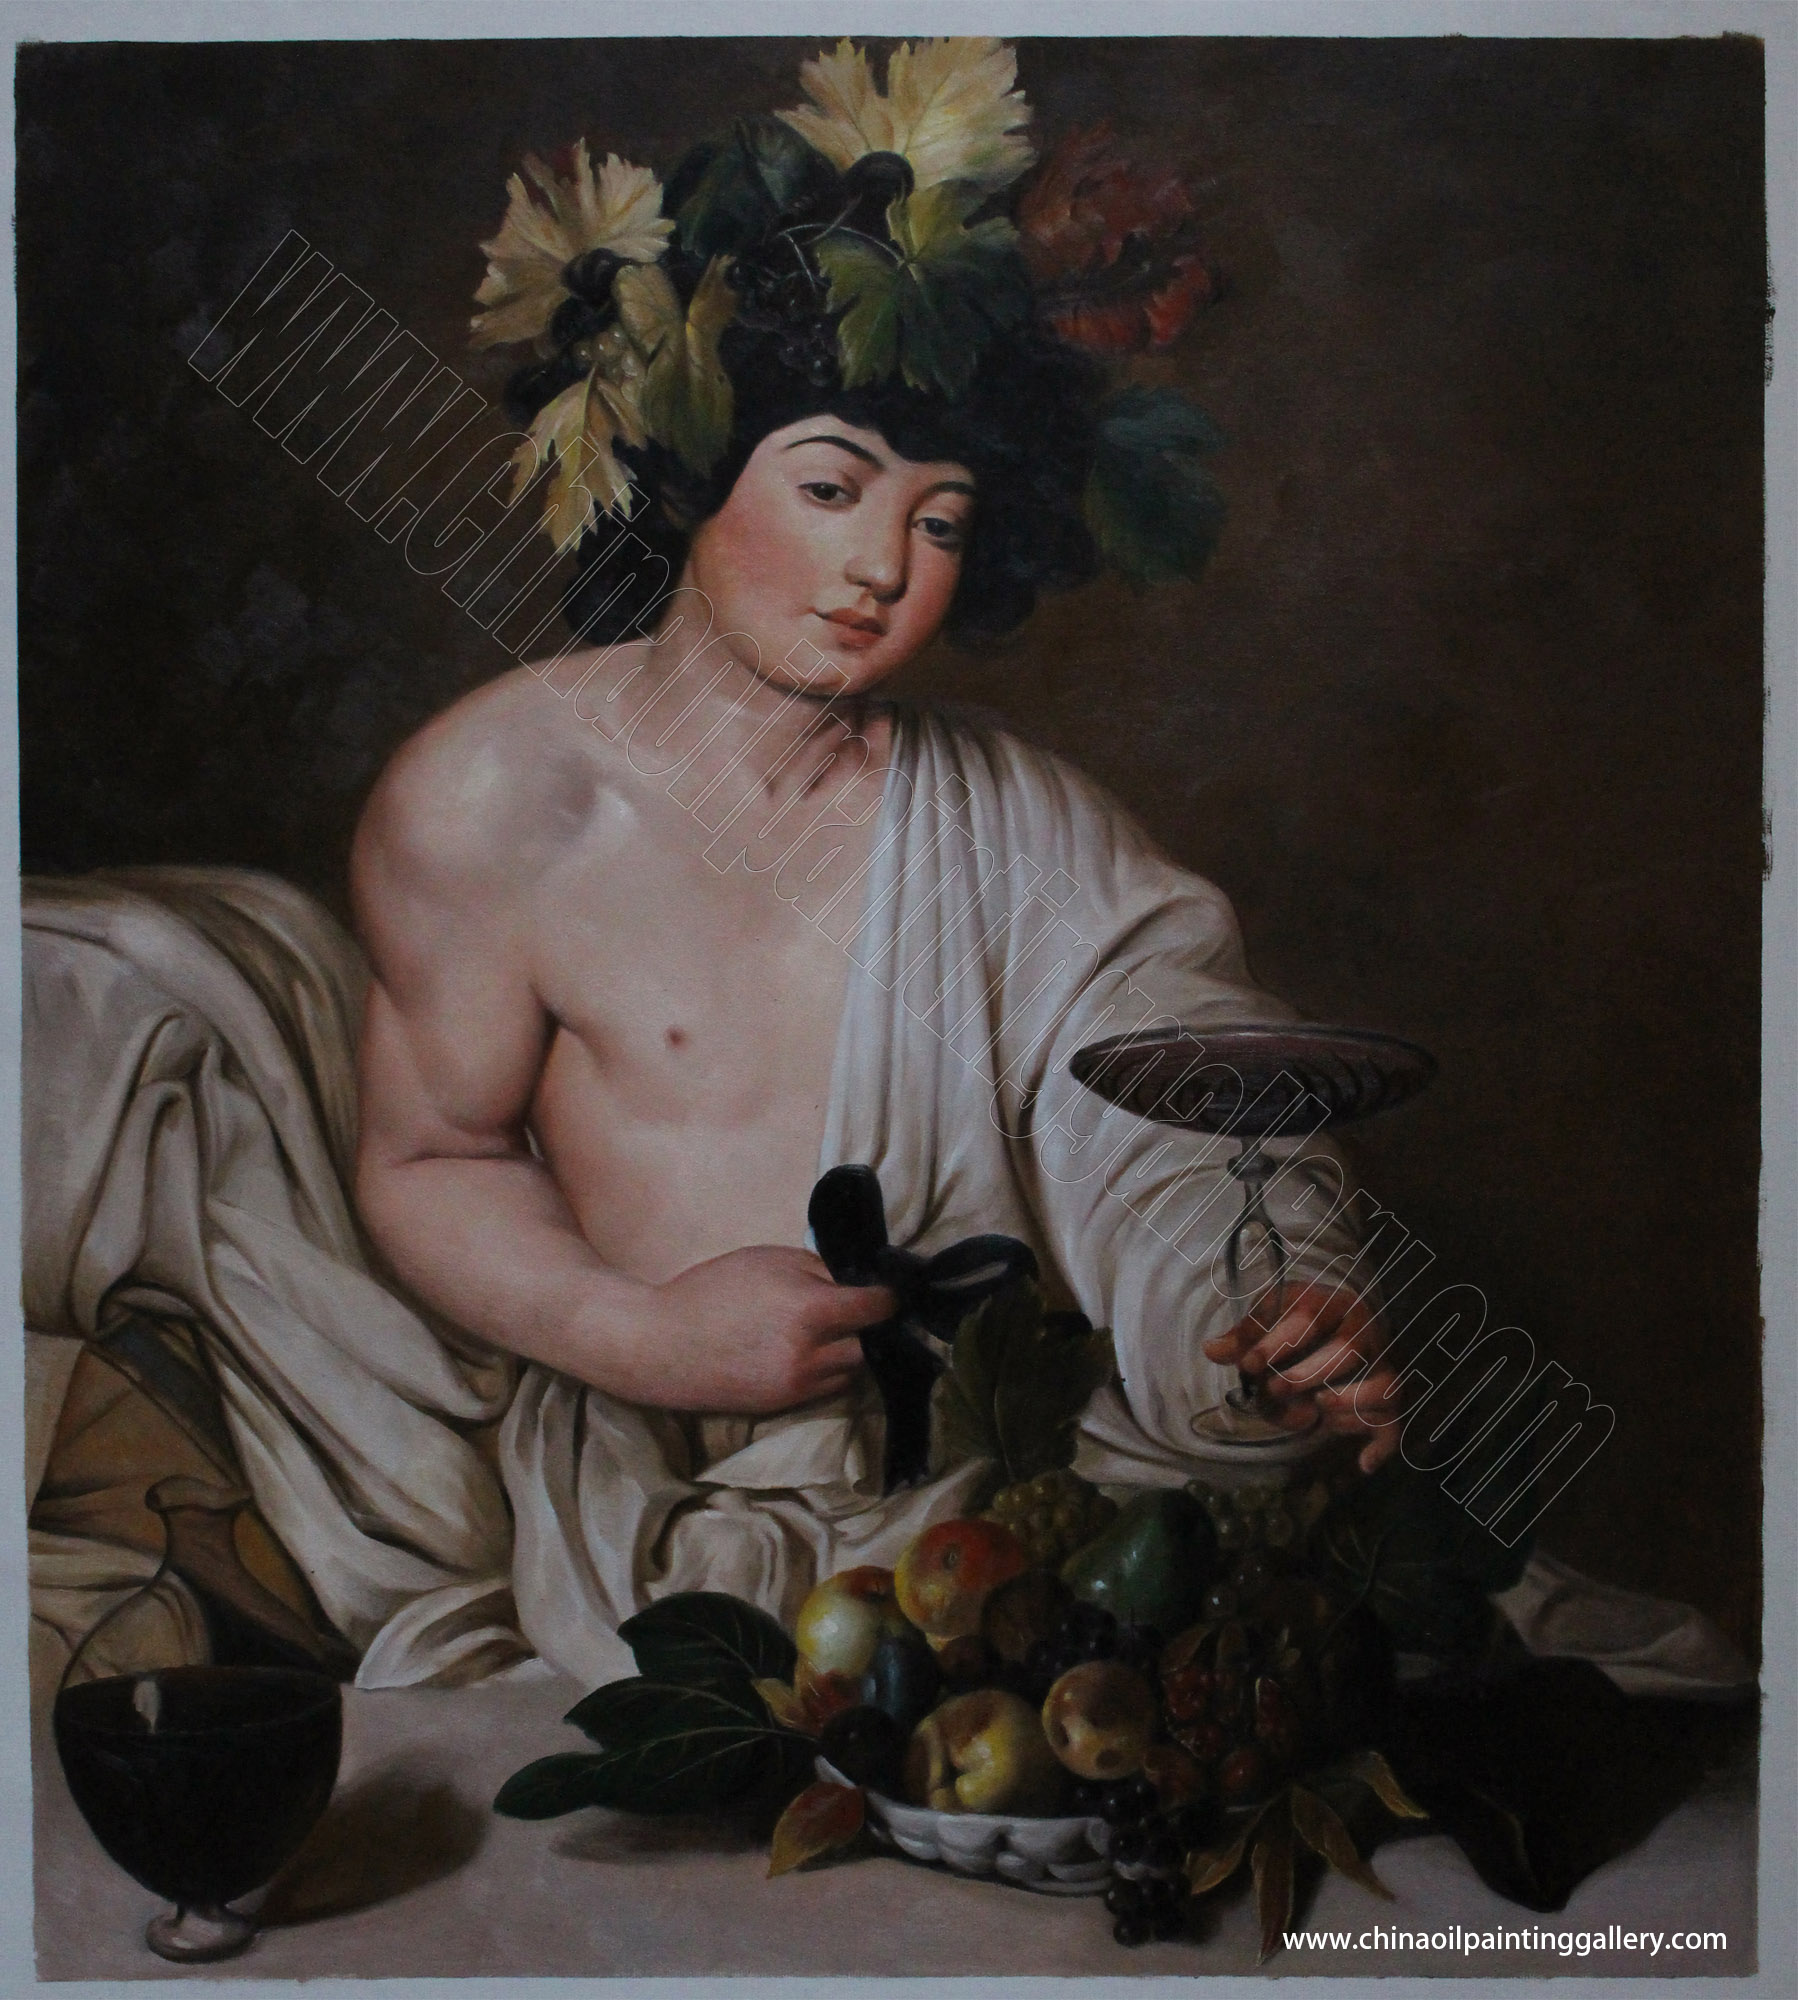 Caravaggio painting reproduction museum quality 2